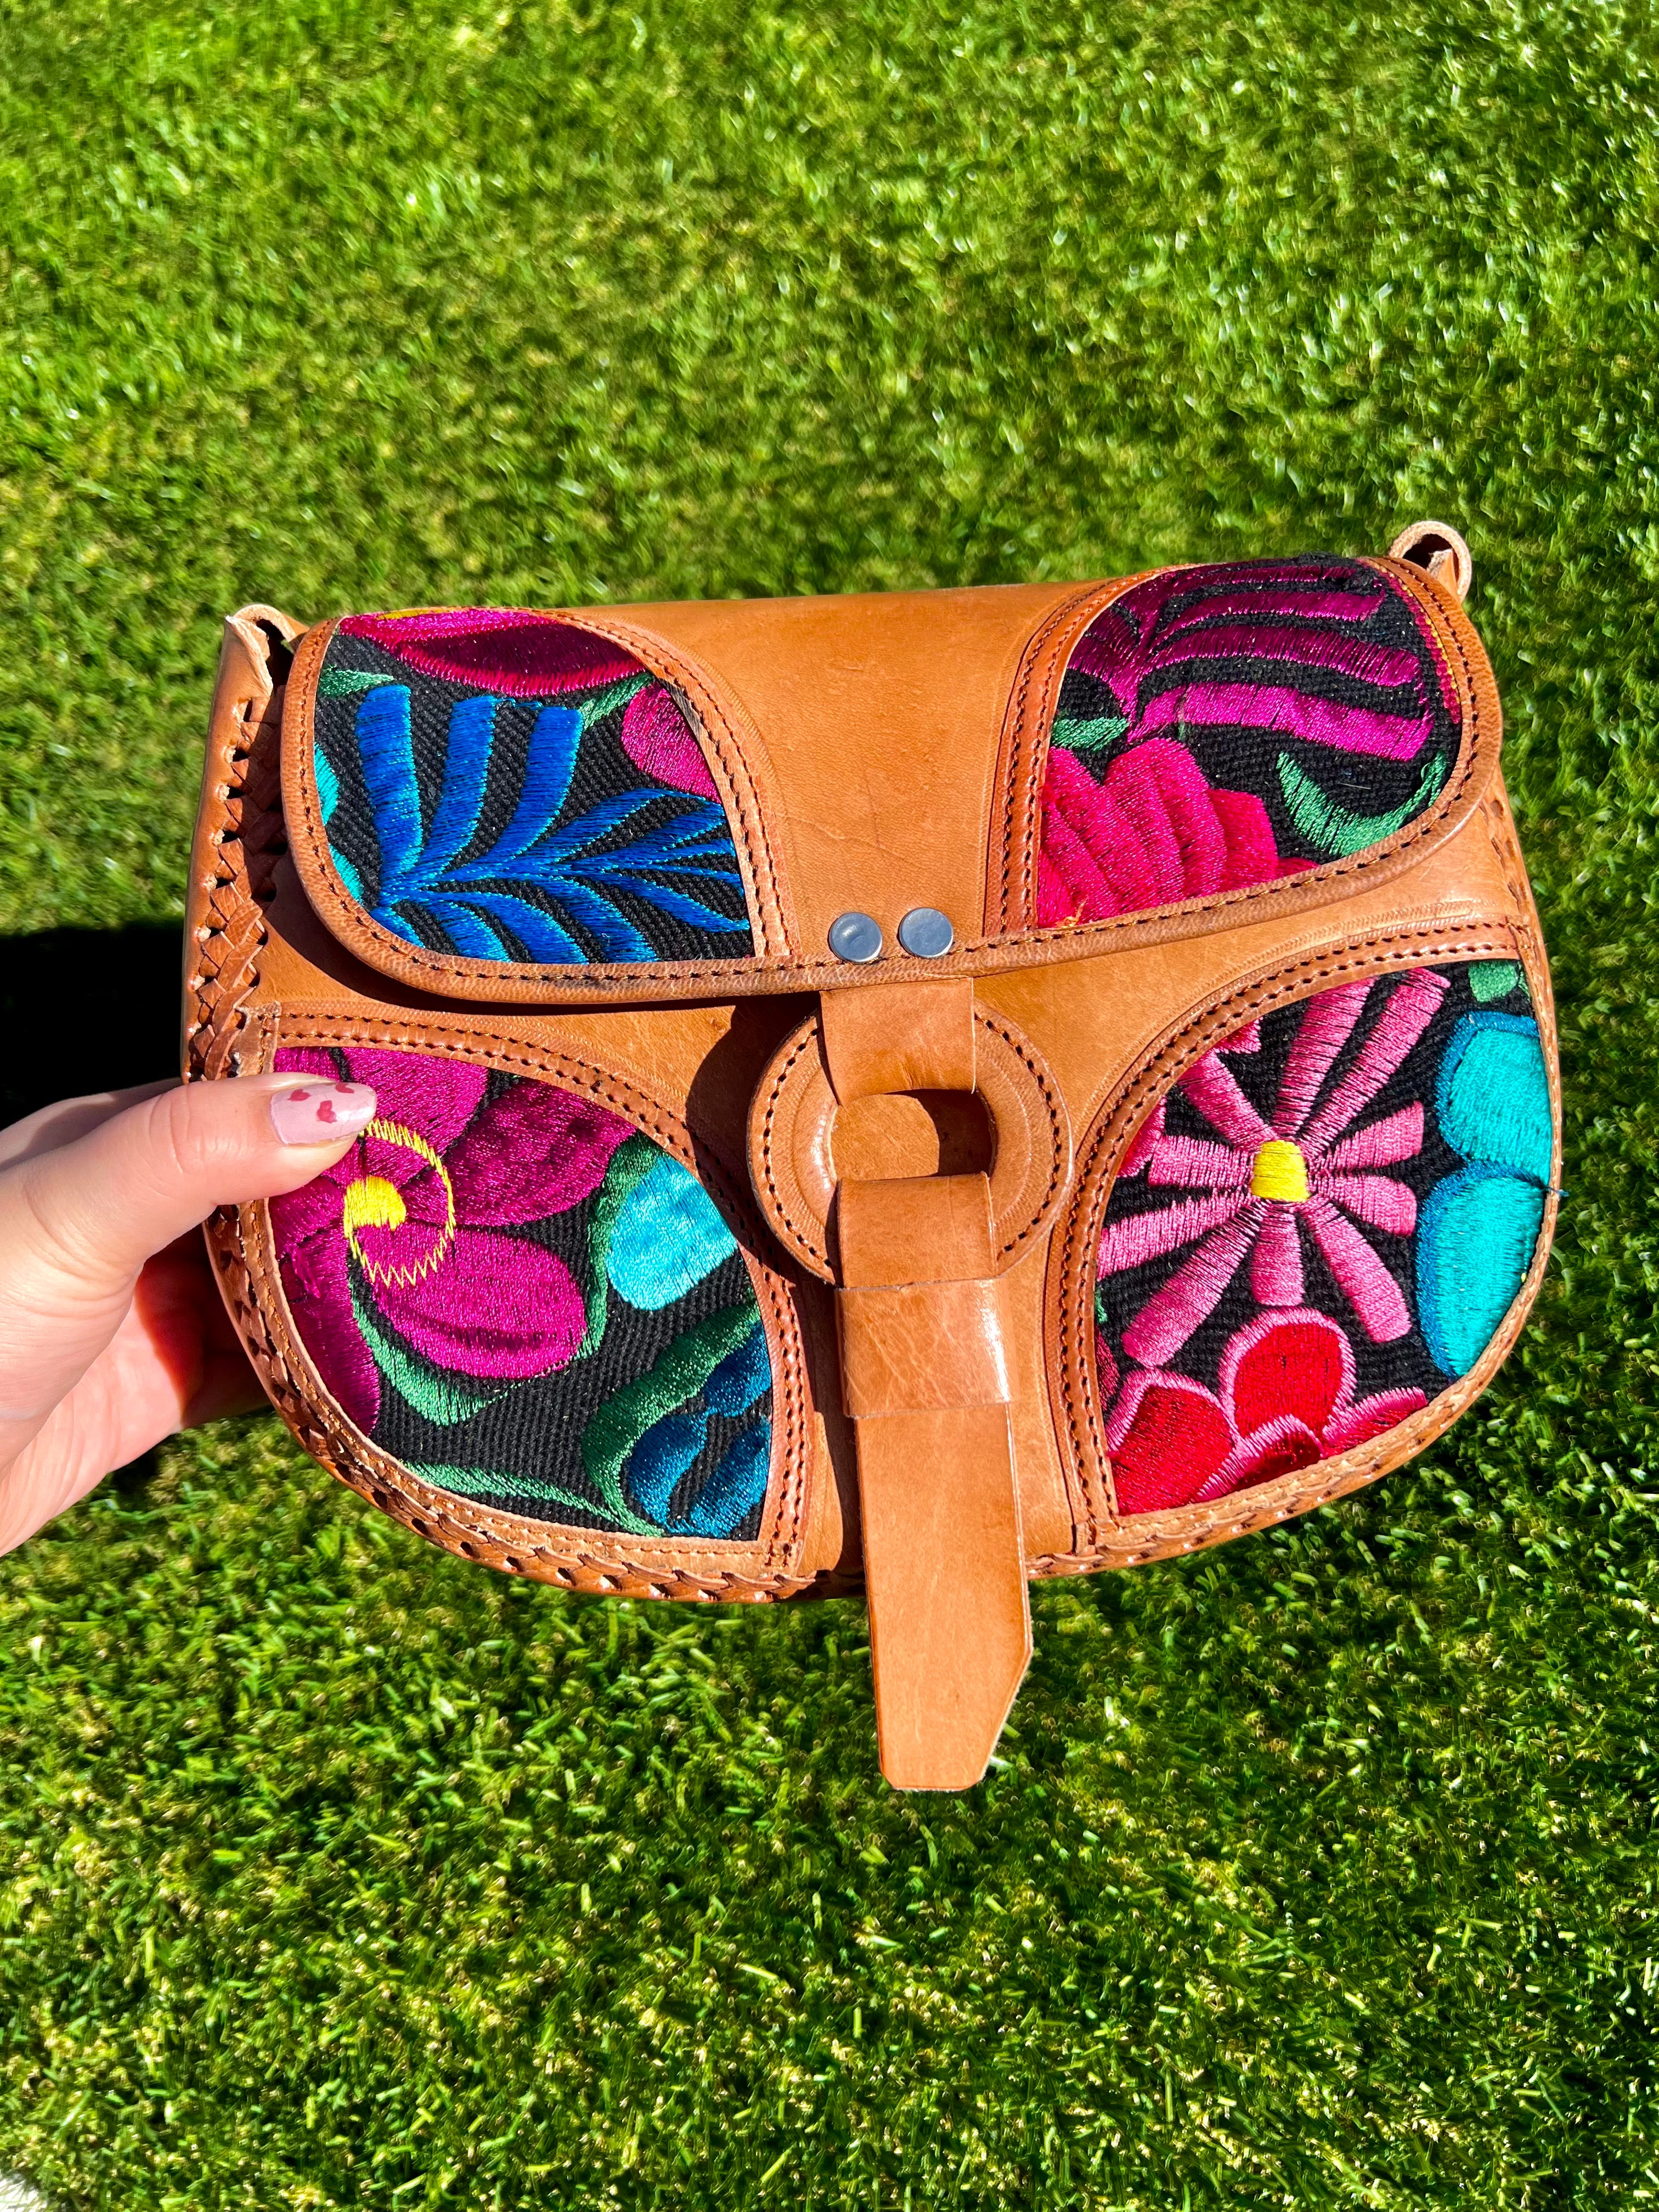 INDHA Hand Embroidered Stylish Shoulder Bag/ College bag for Girls/Women -  Curated online shop for handcrafted products made in India by women artisans